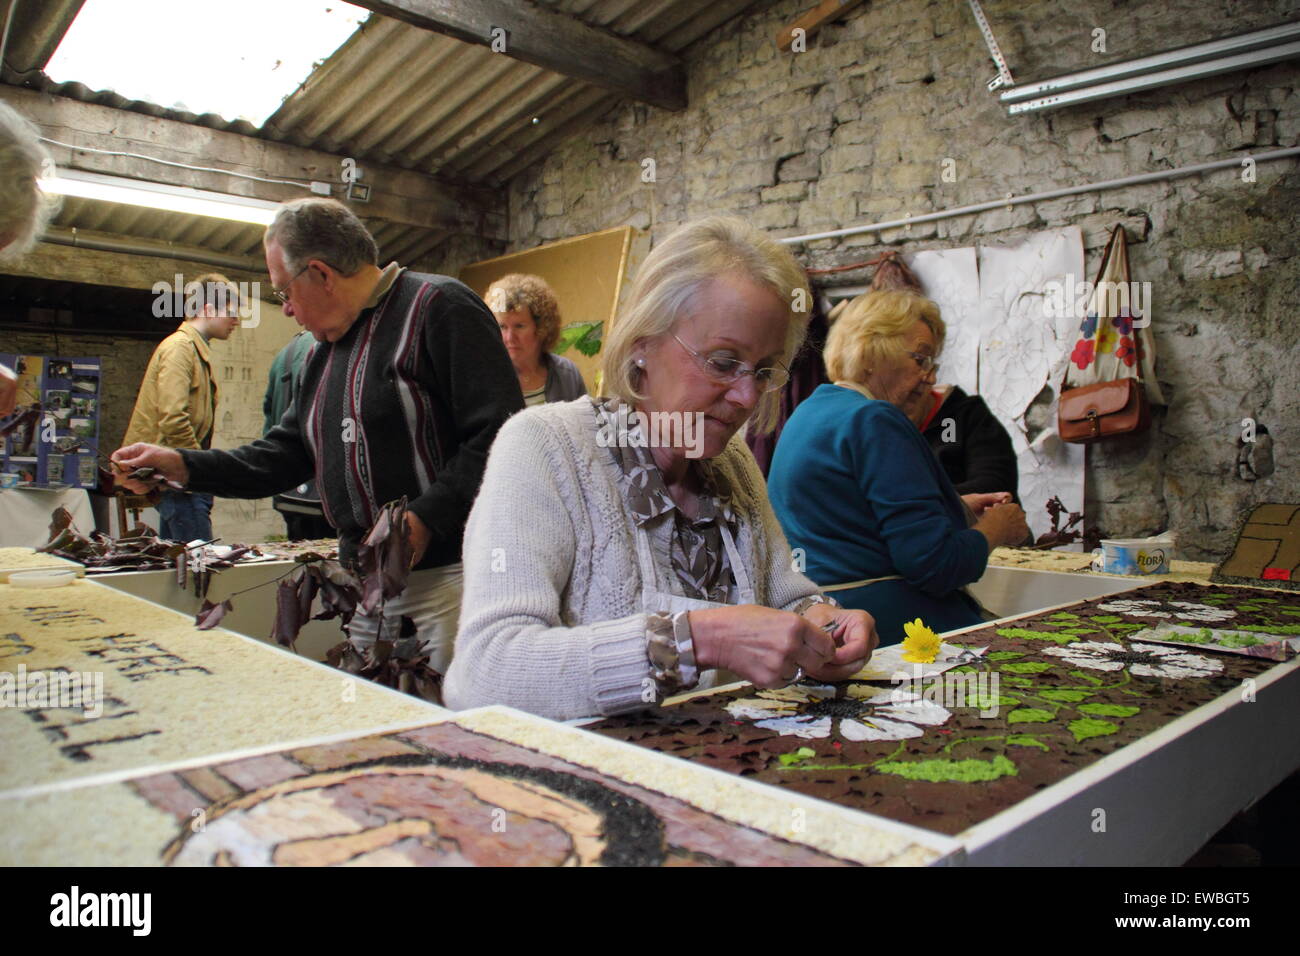 Volunteers work with natural materials to prepare Tideswell village's well dressing in the Peak District National Park, England Stock Photo